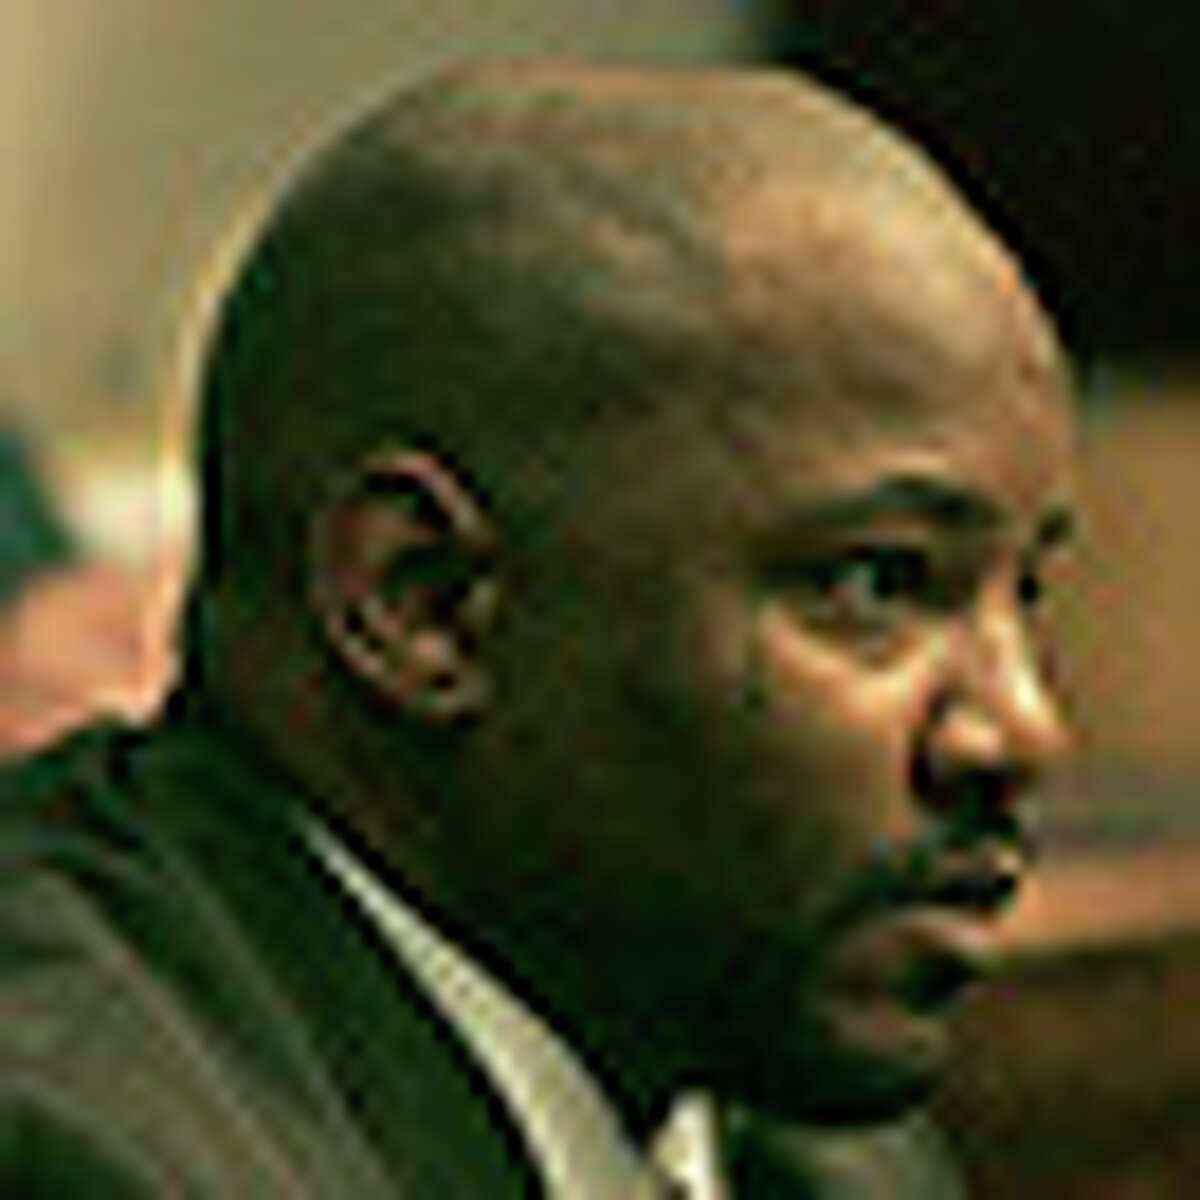 Metro daily - Murder trial of Ronnie Joe Neal, pictured, who is accused of killing Alamo Hieghts school teacher Diane Tilly, in the 226th District Court, Tuesday, Feb. 21, 2006. Photo Bob Owen